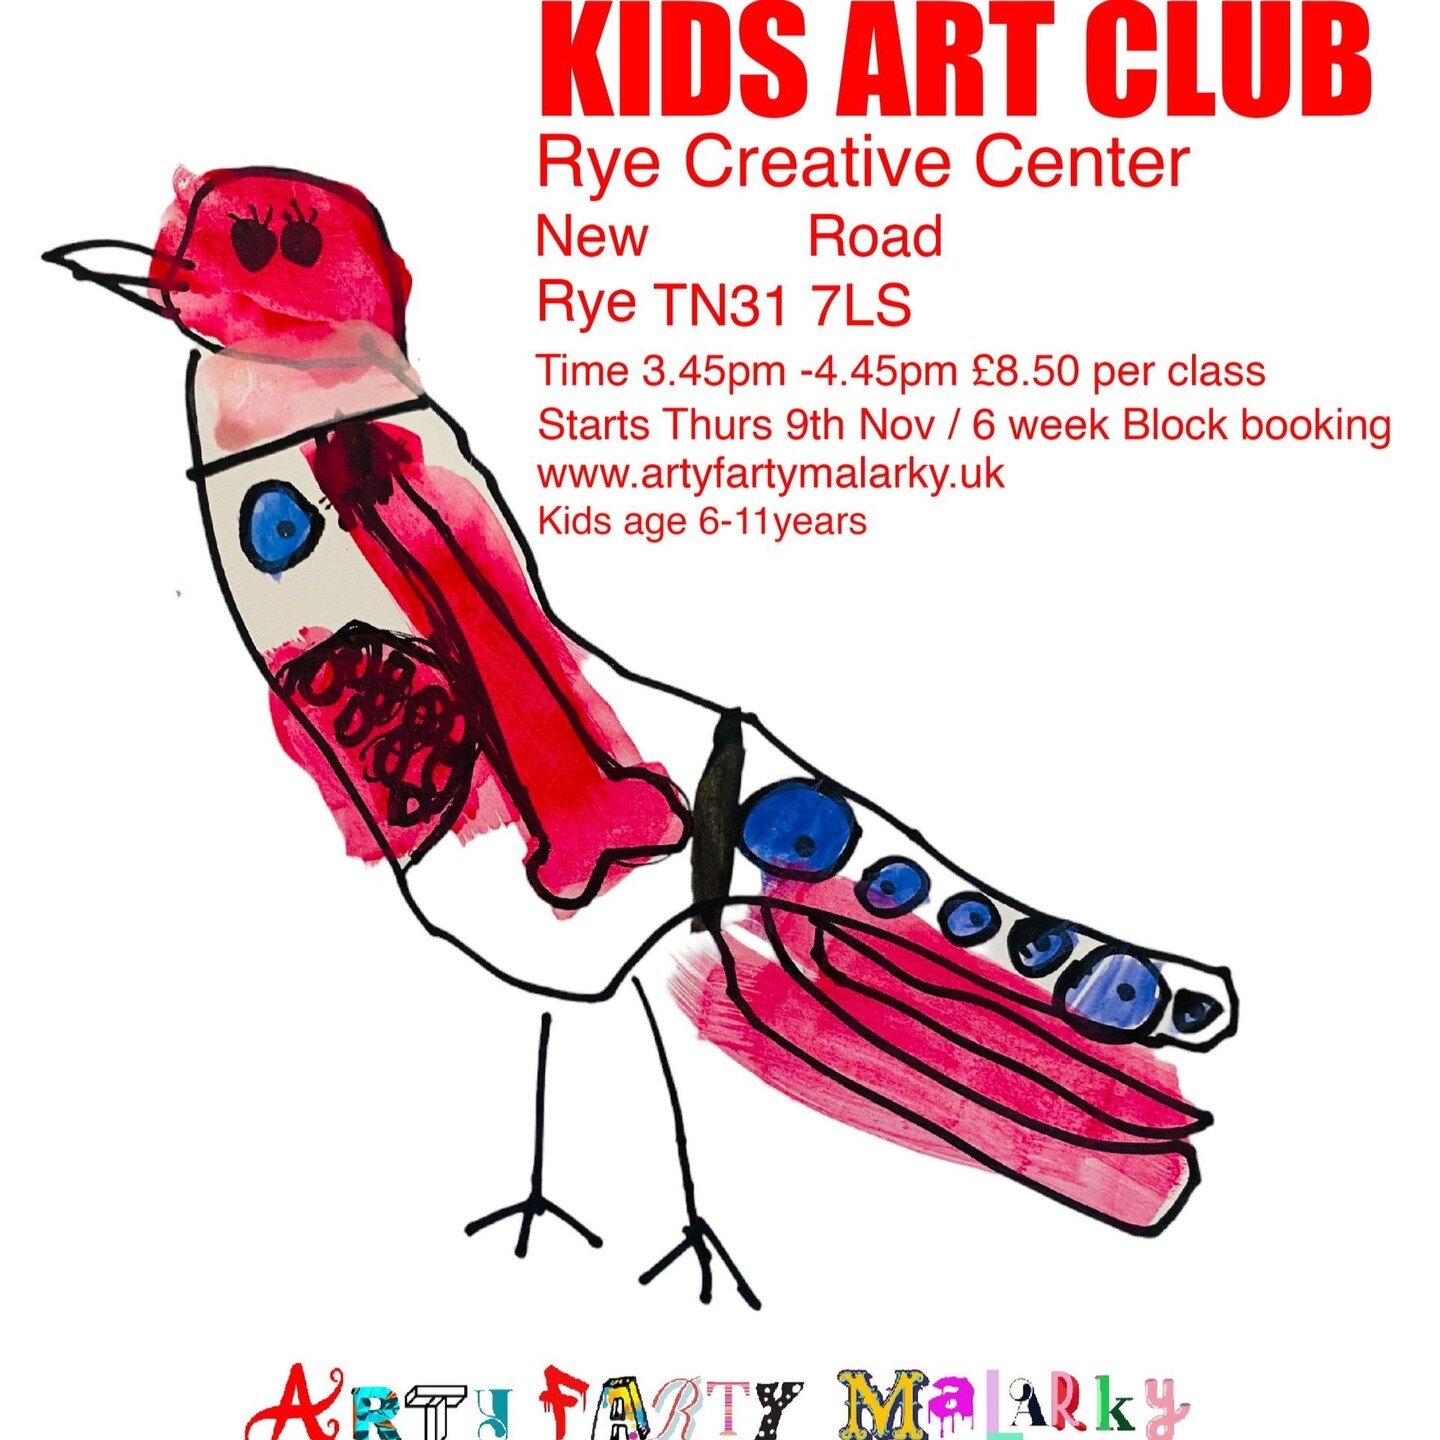 KIDS ART CLUB 🎨🖌✏️

📆 Every Thursday
⏰ 3:45pm to 4:45pm

Rye Creative Centre are hosting a brand new kids art club for Georgia at Arty Farty Malarky starting 9th November 2023 and running every Thursday during term time.

These art classes are for